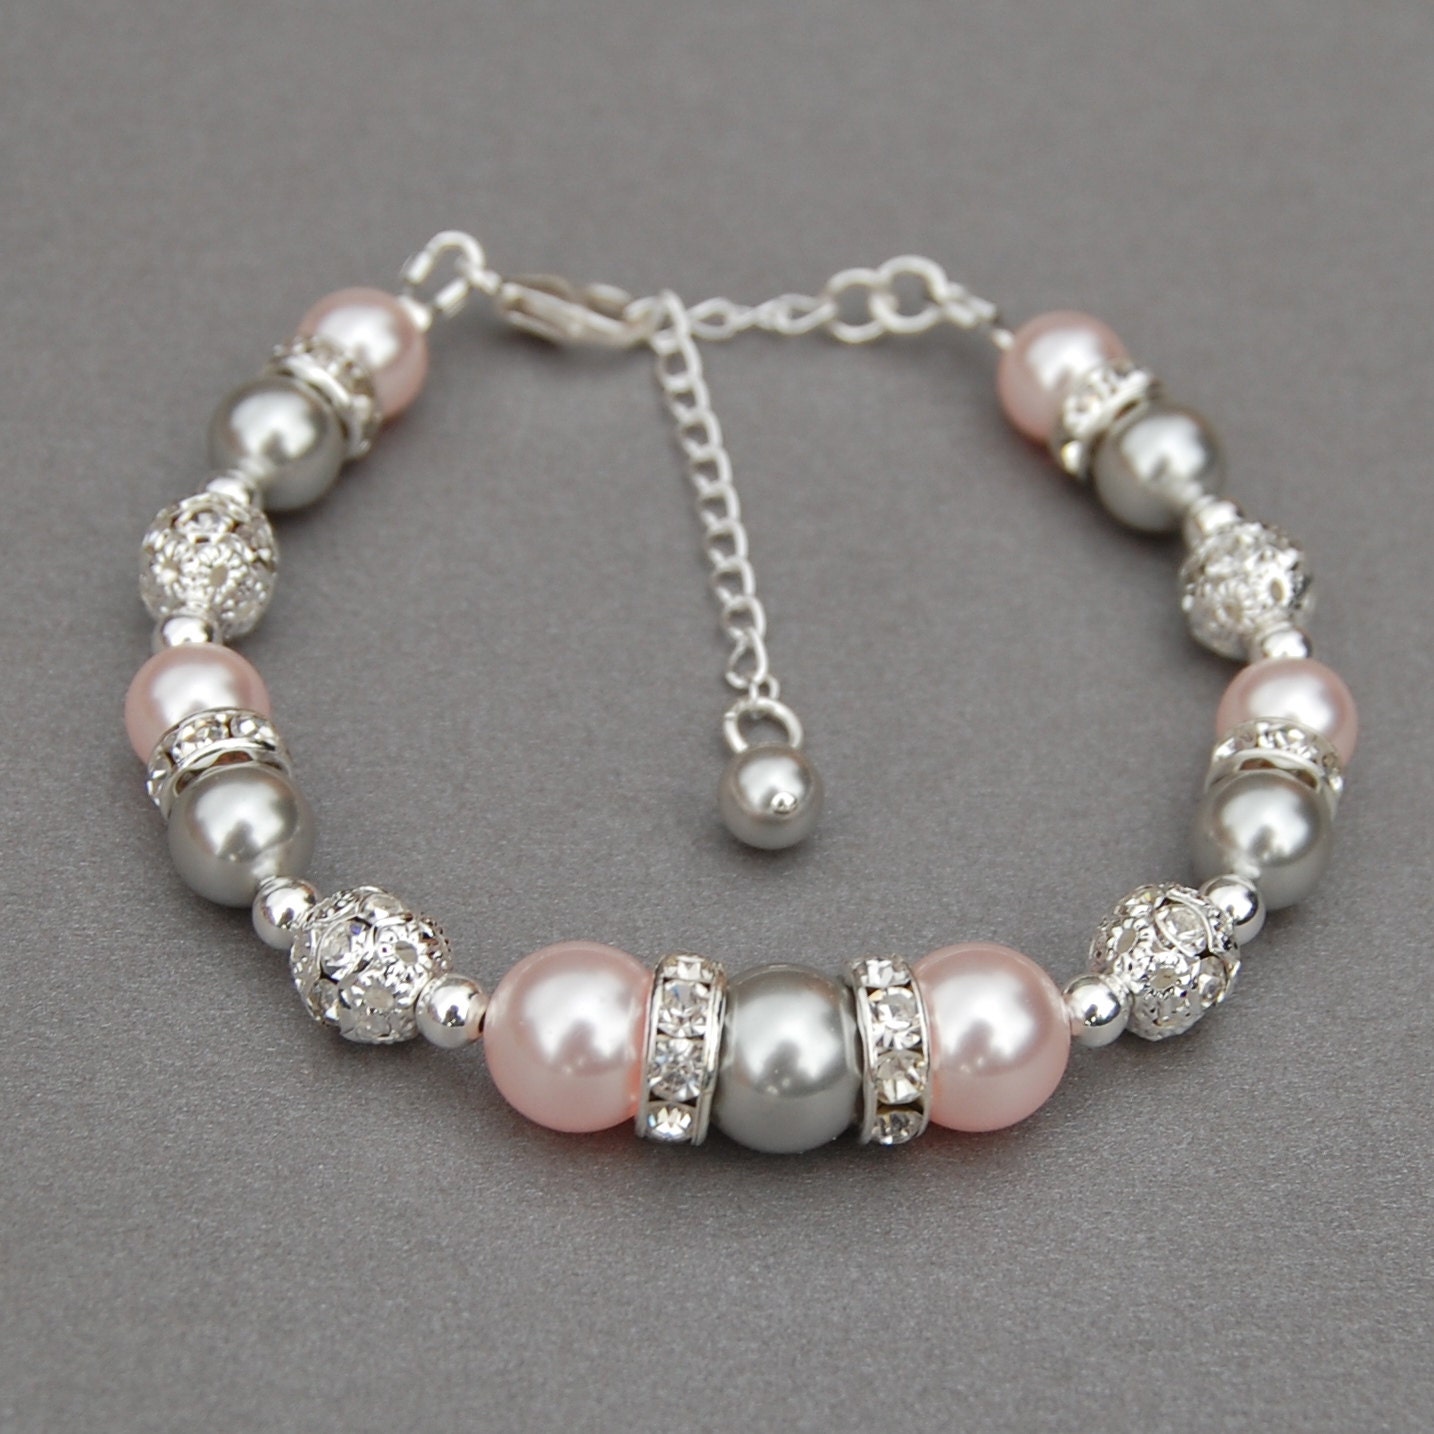 Pink and Gray Pearl Bracelet Pastel Wedding Jewelry - Etsy